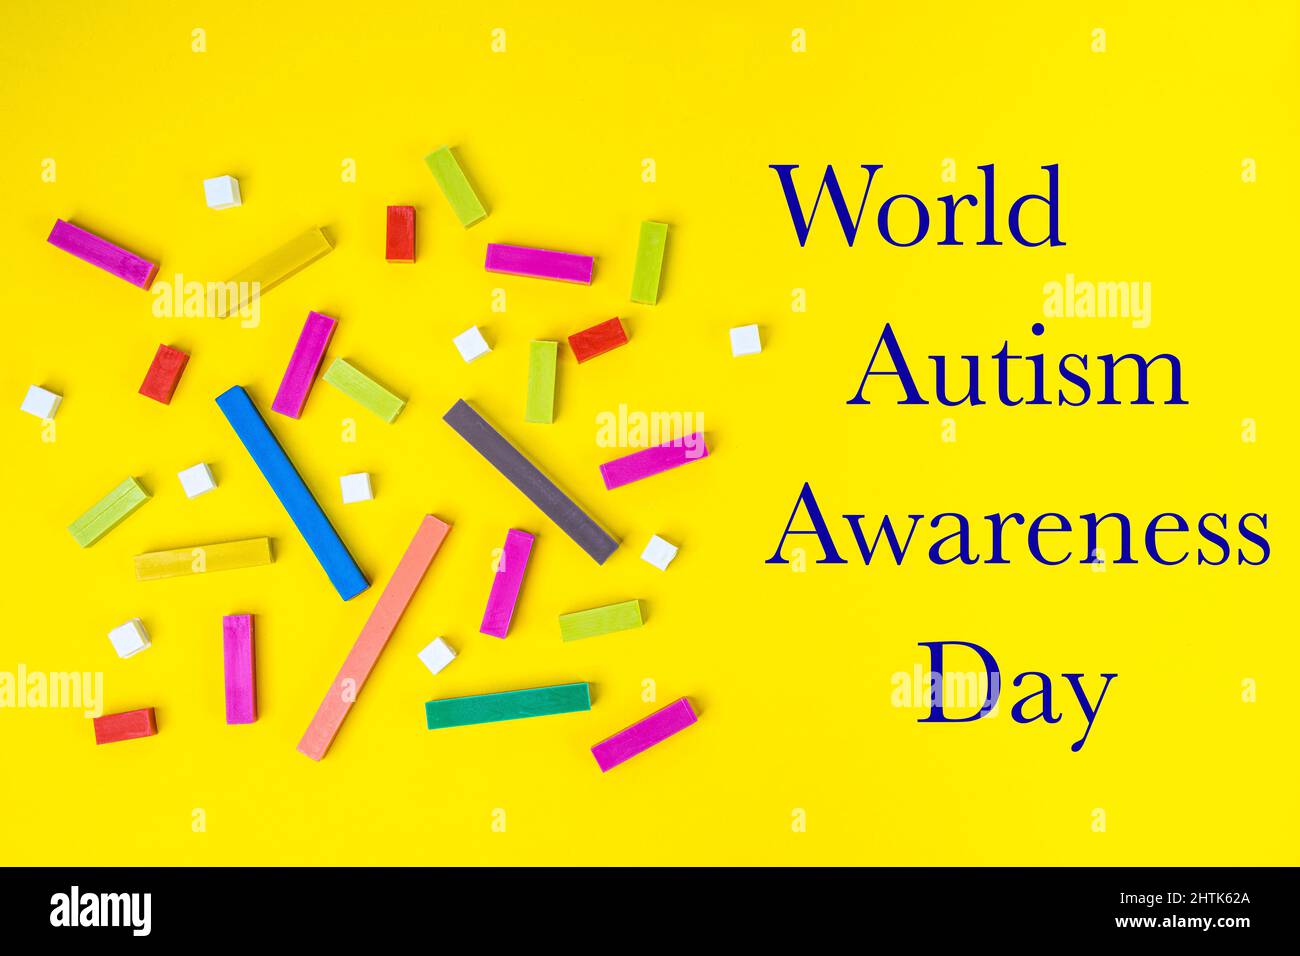 The concept of the United Nations World Autism Awareness Day at April 2. Stock Photo